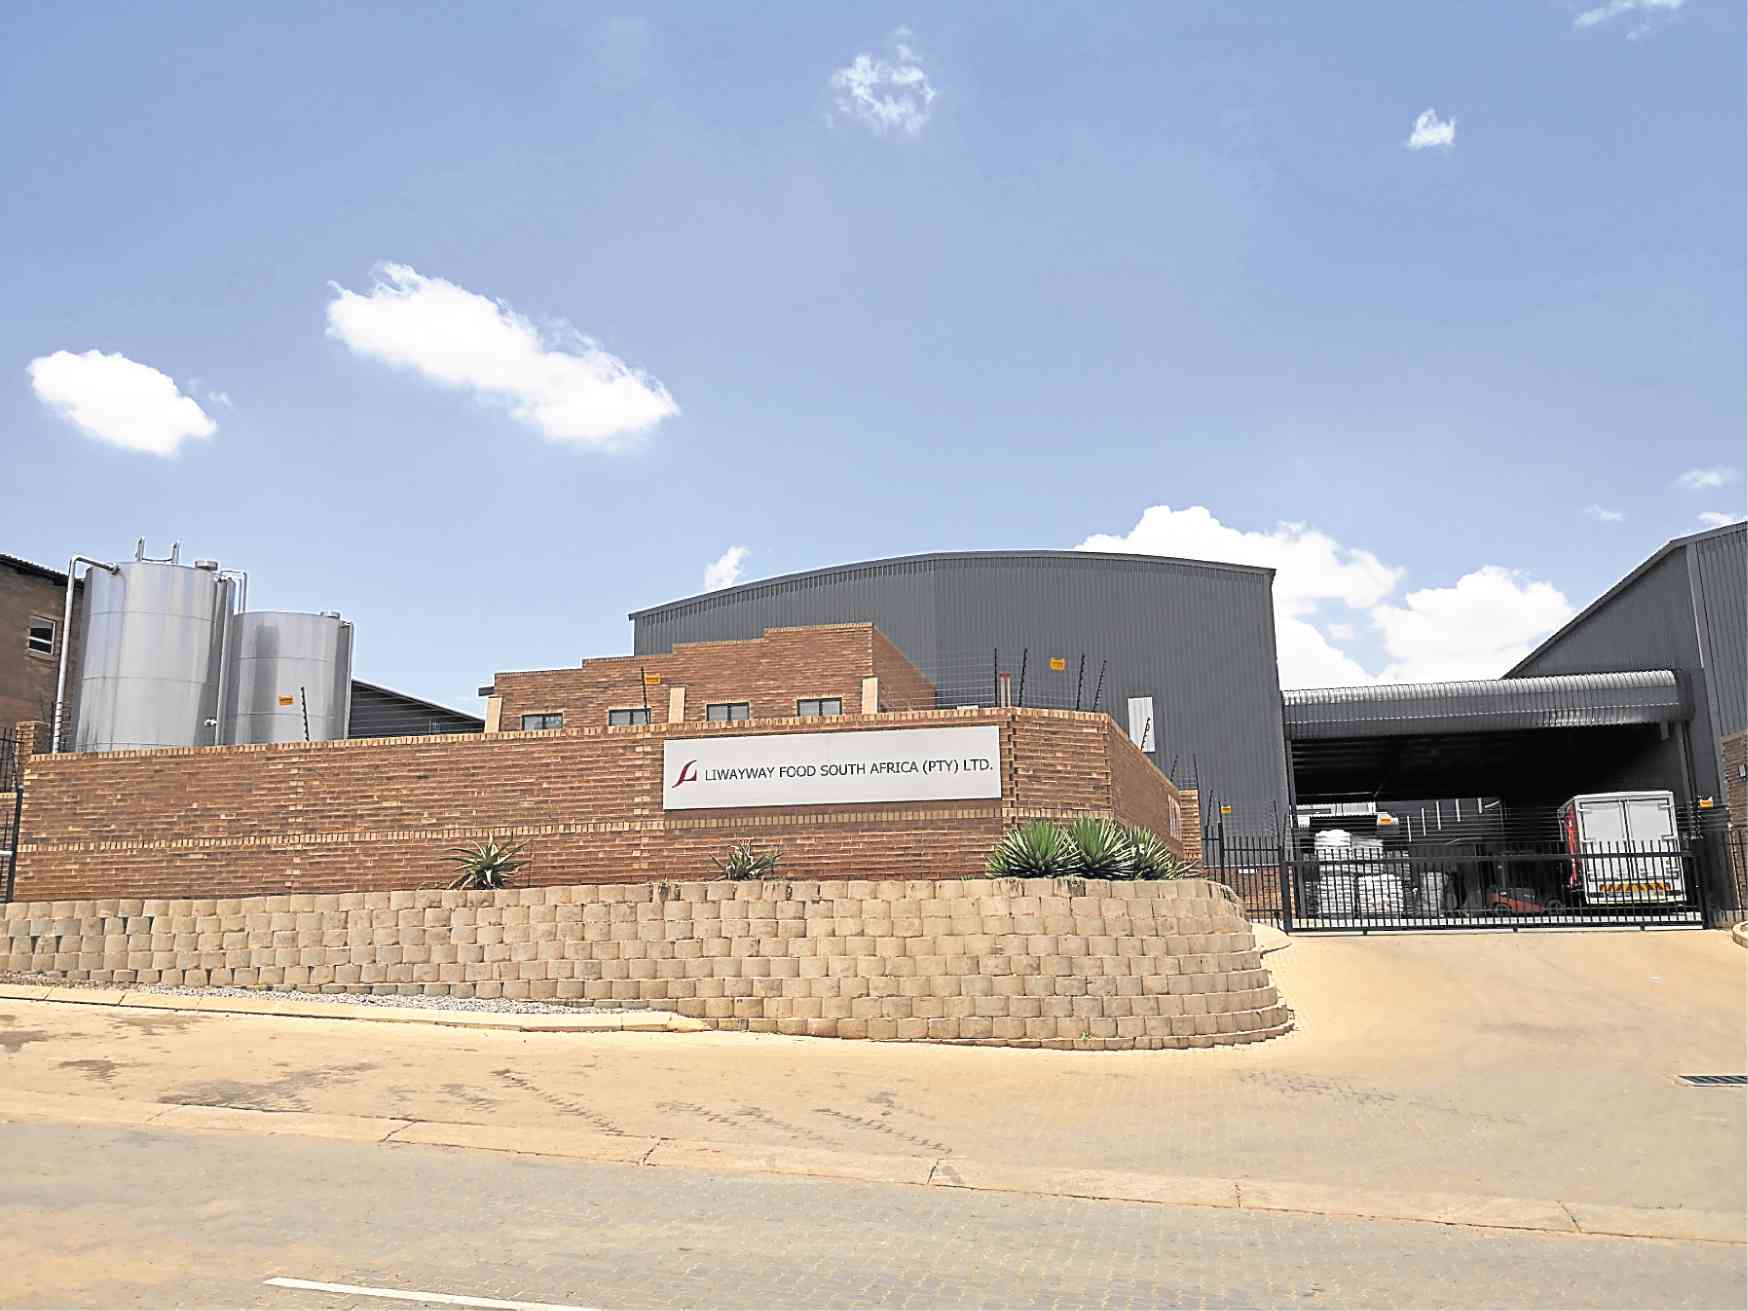 Liwayway facilities in South Africa —CONTRIBUTED PHOTO